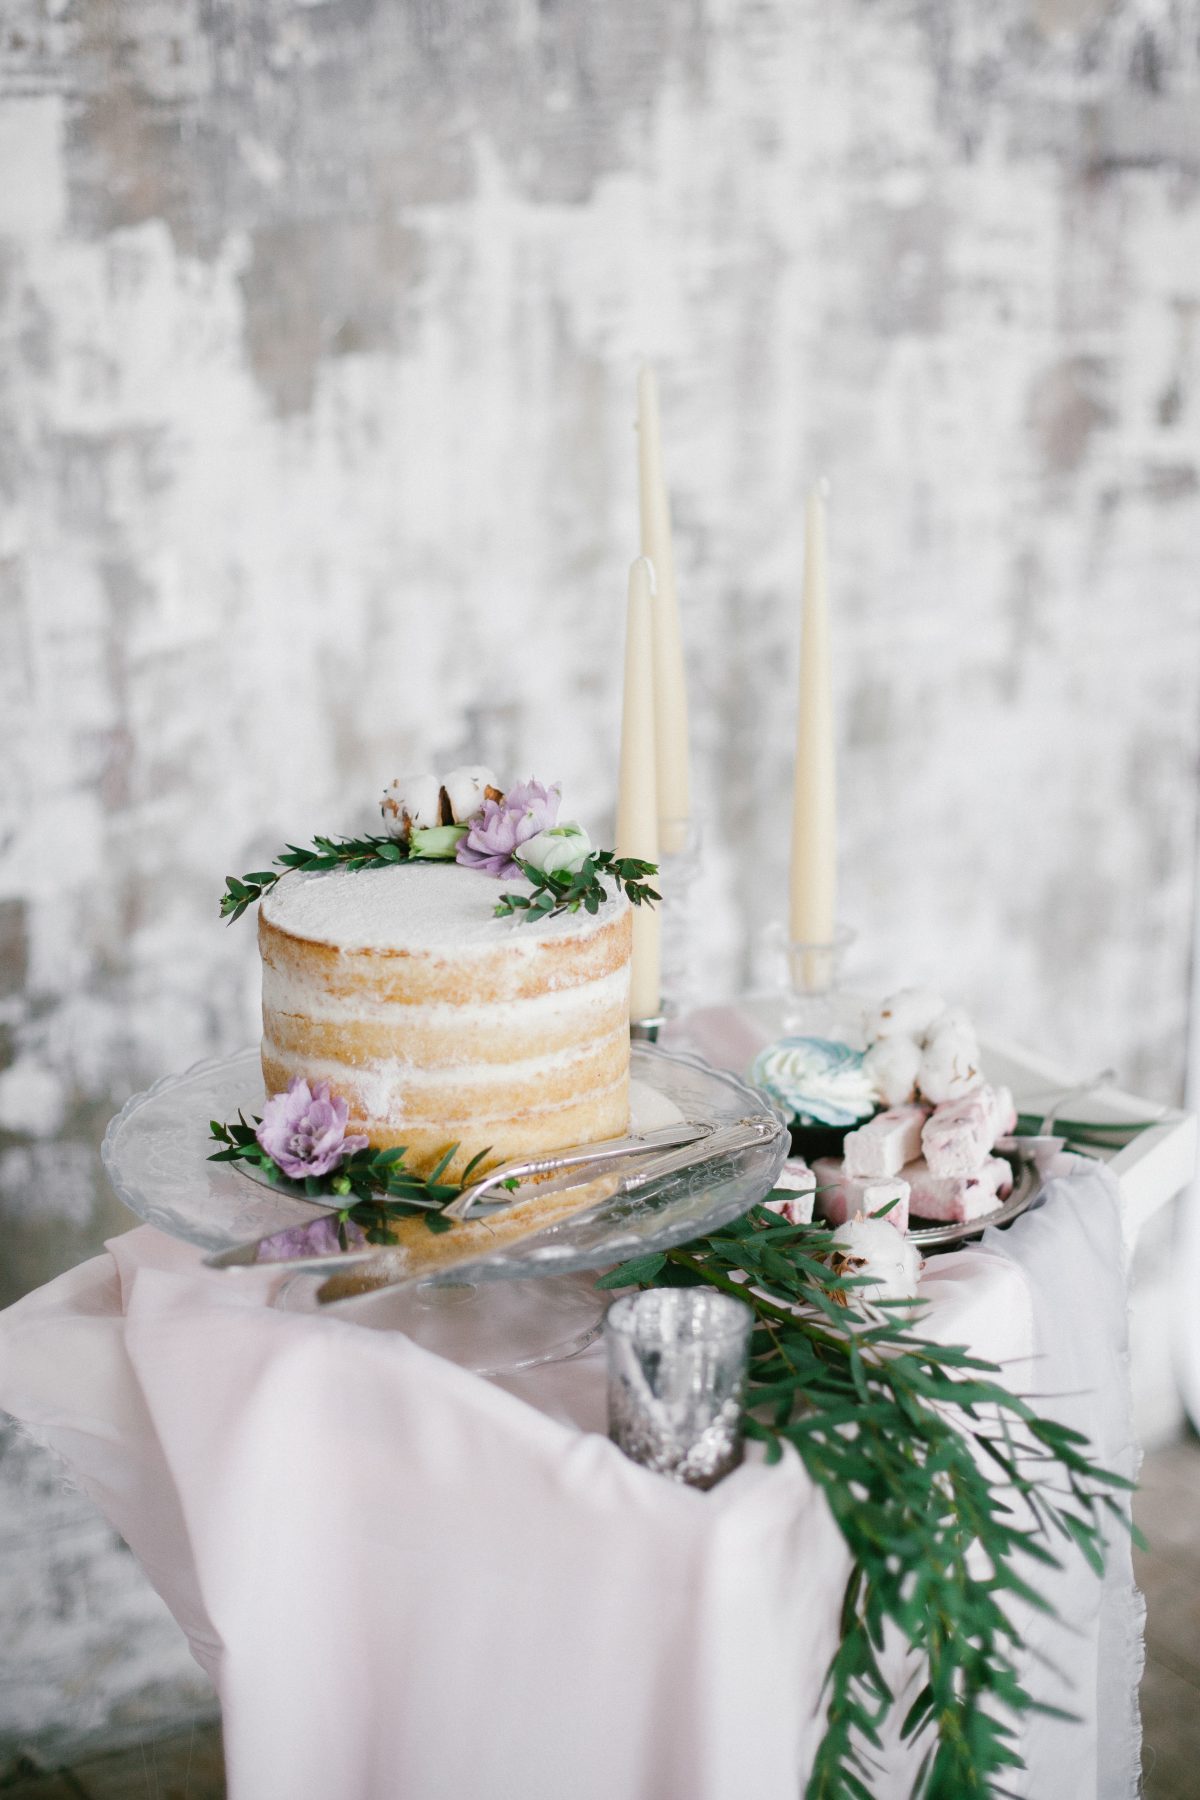 Beautiful naked wedding cake on table with grey washed wall behind it